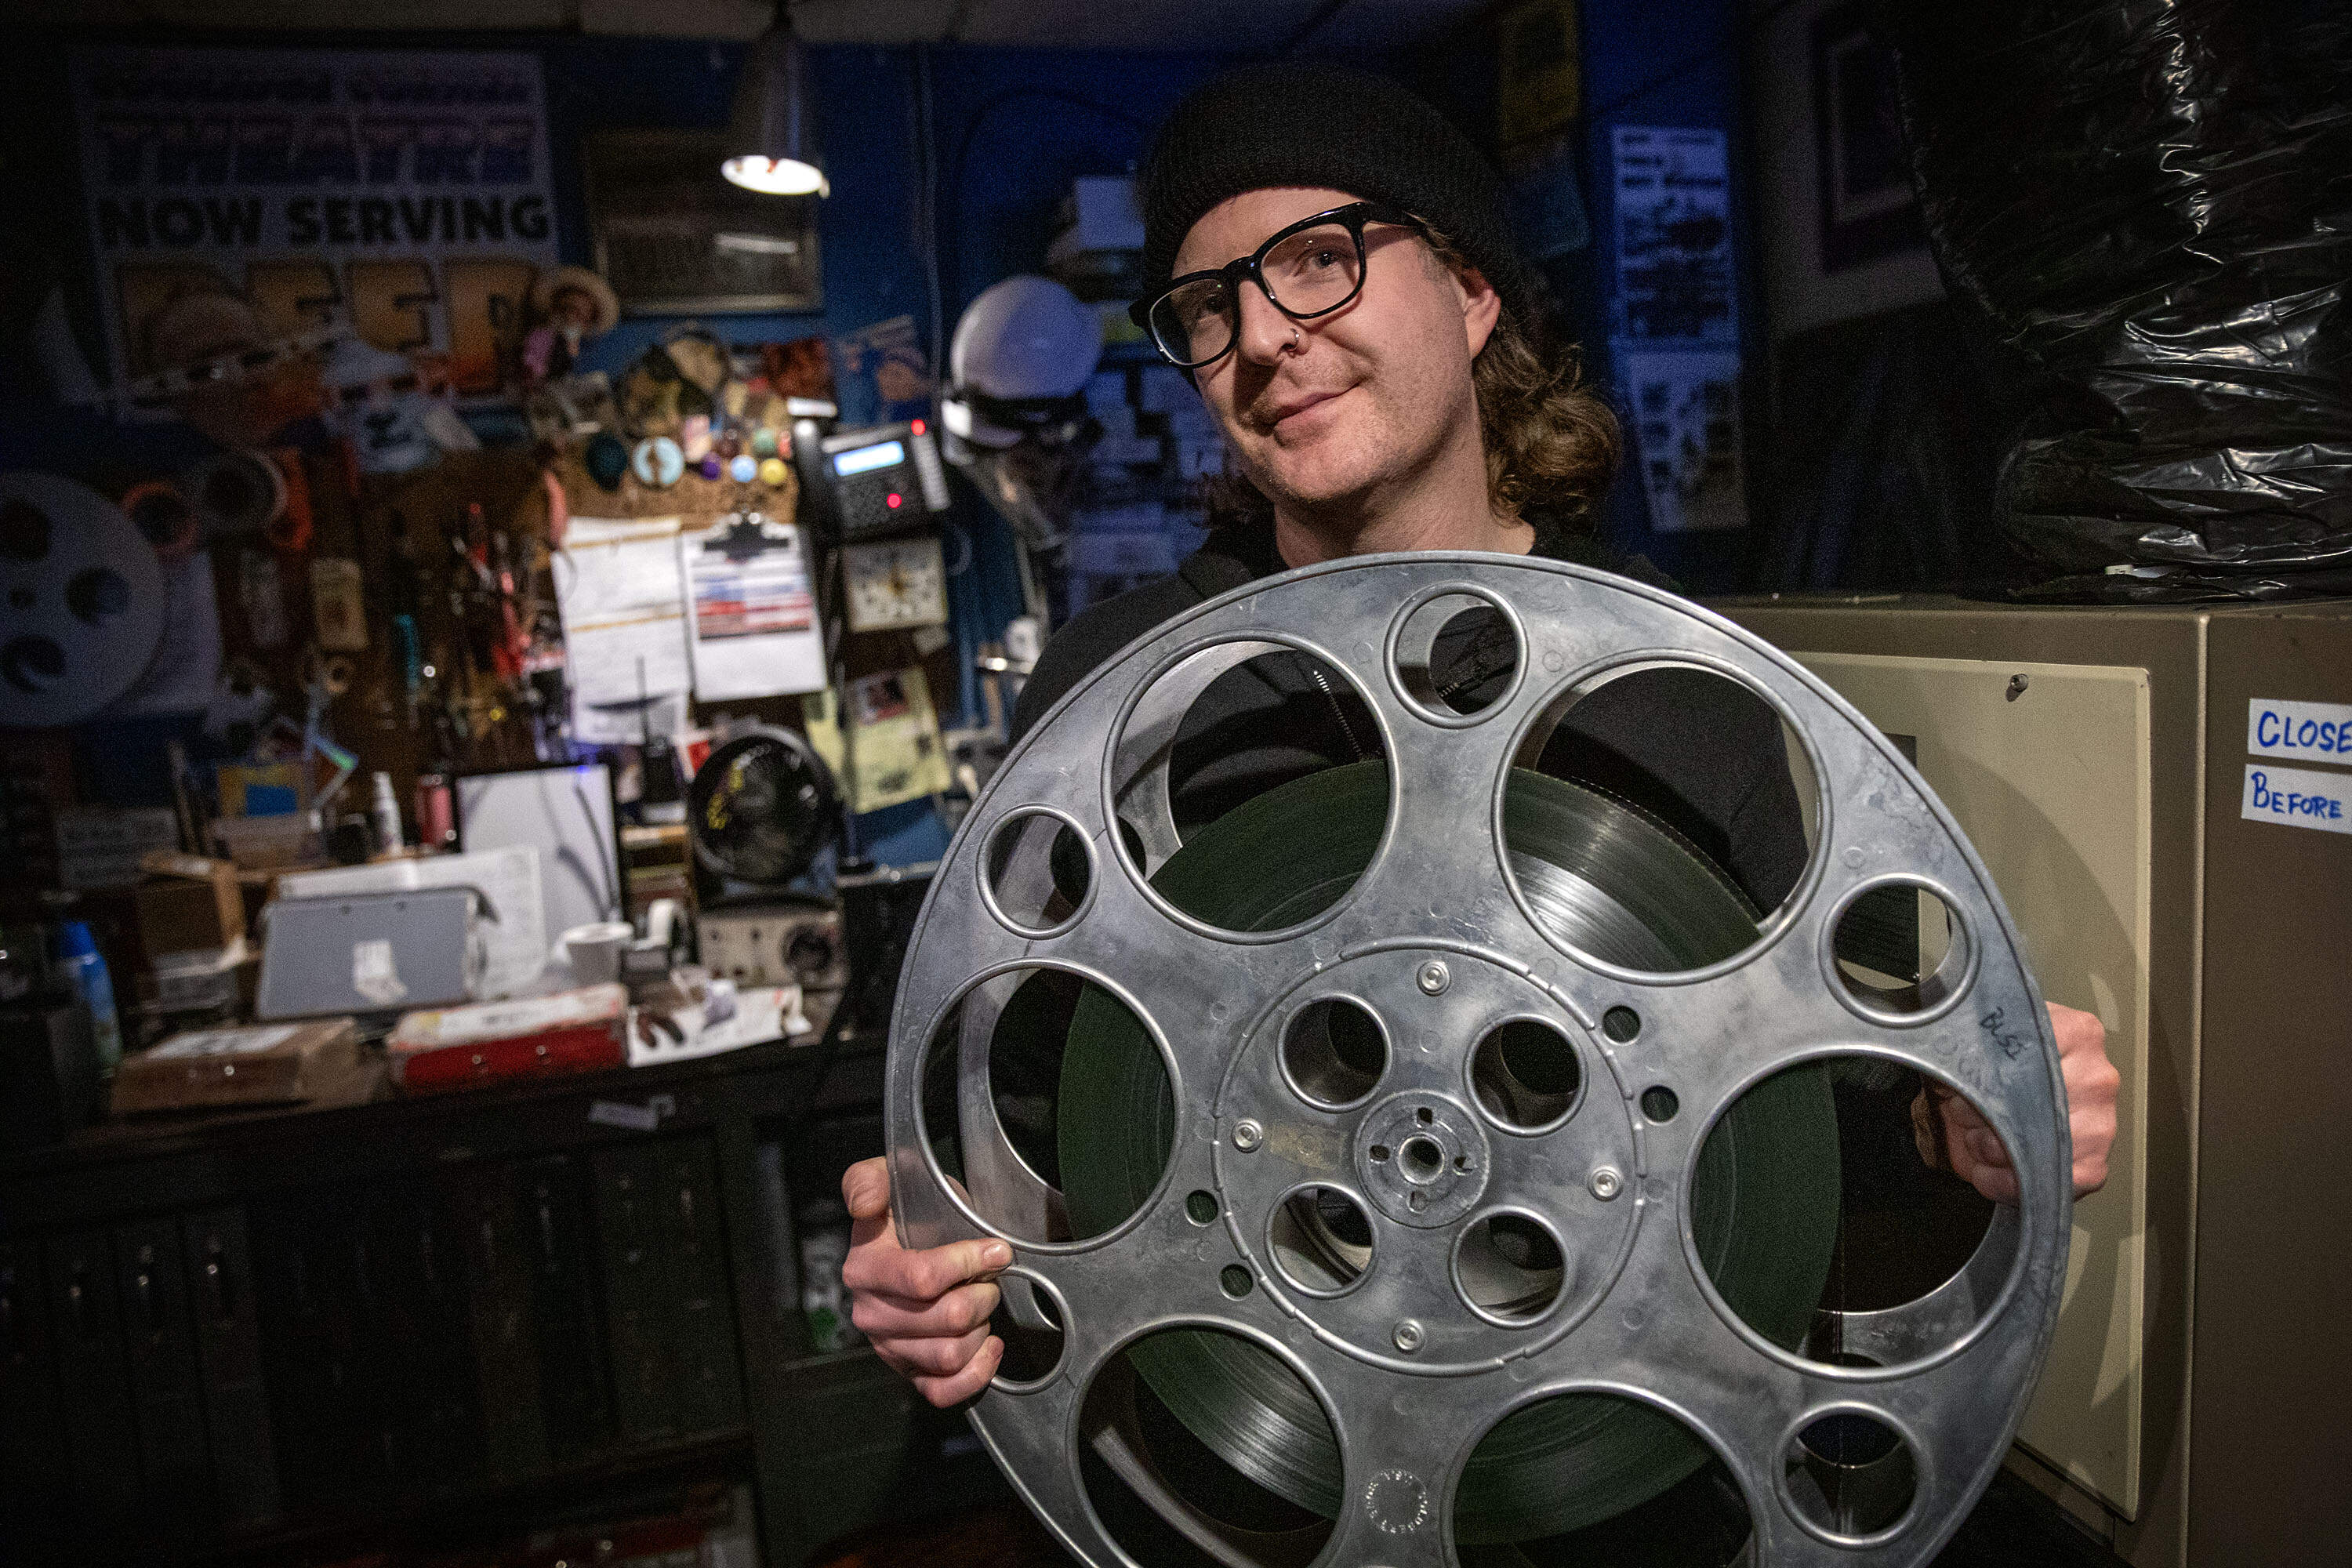 Lead Projectionist Thomas Welch holds a reel of 70mm film in the Moviehouse 1 projection room at the Coolidge Corner Theatre. (Robin Lubbock/WBUR)